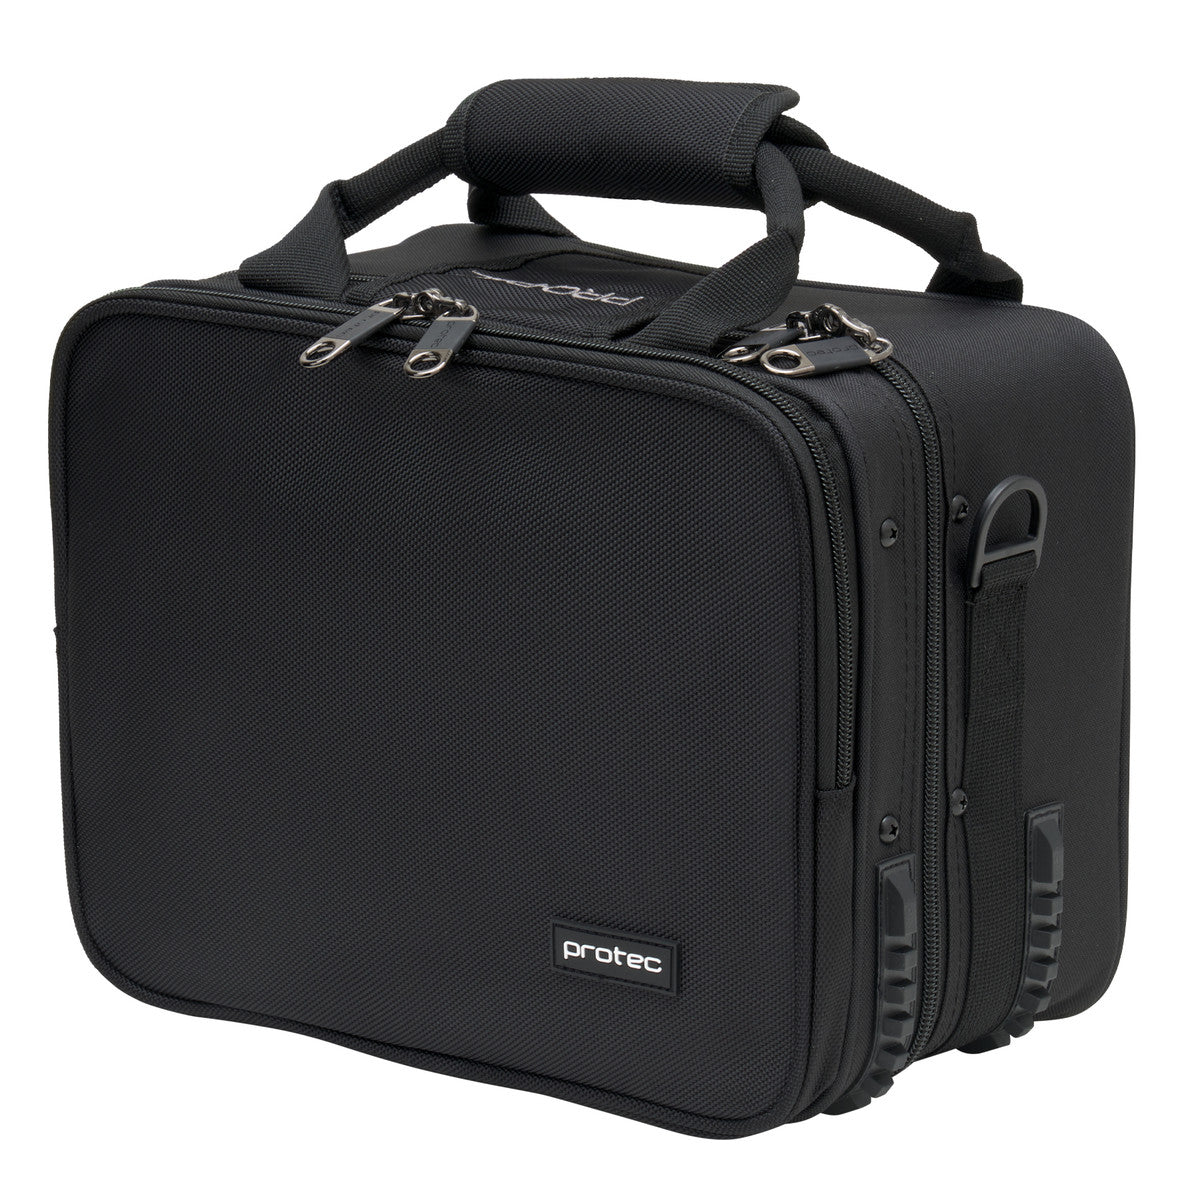 PROTEC Equipment Pro Pac Case with Foam Inserts